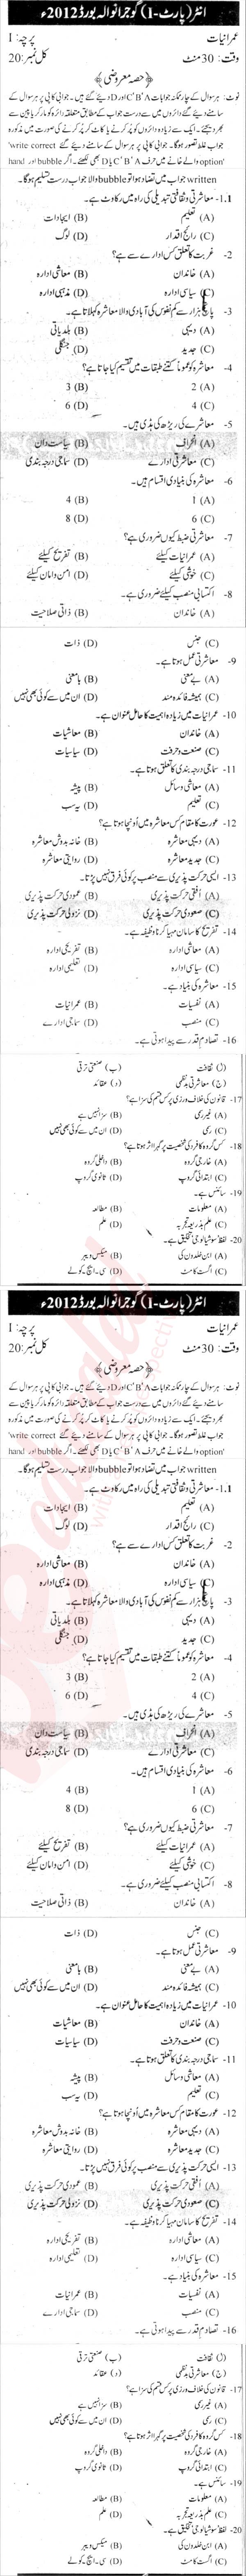 Sociology FA Part 1 Past Paper Group 1 BISE Gujranwala 2012